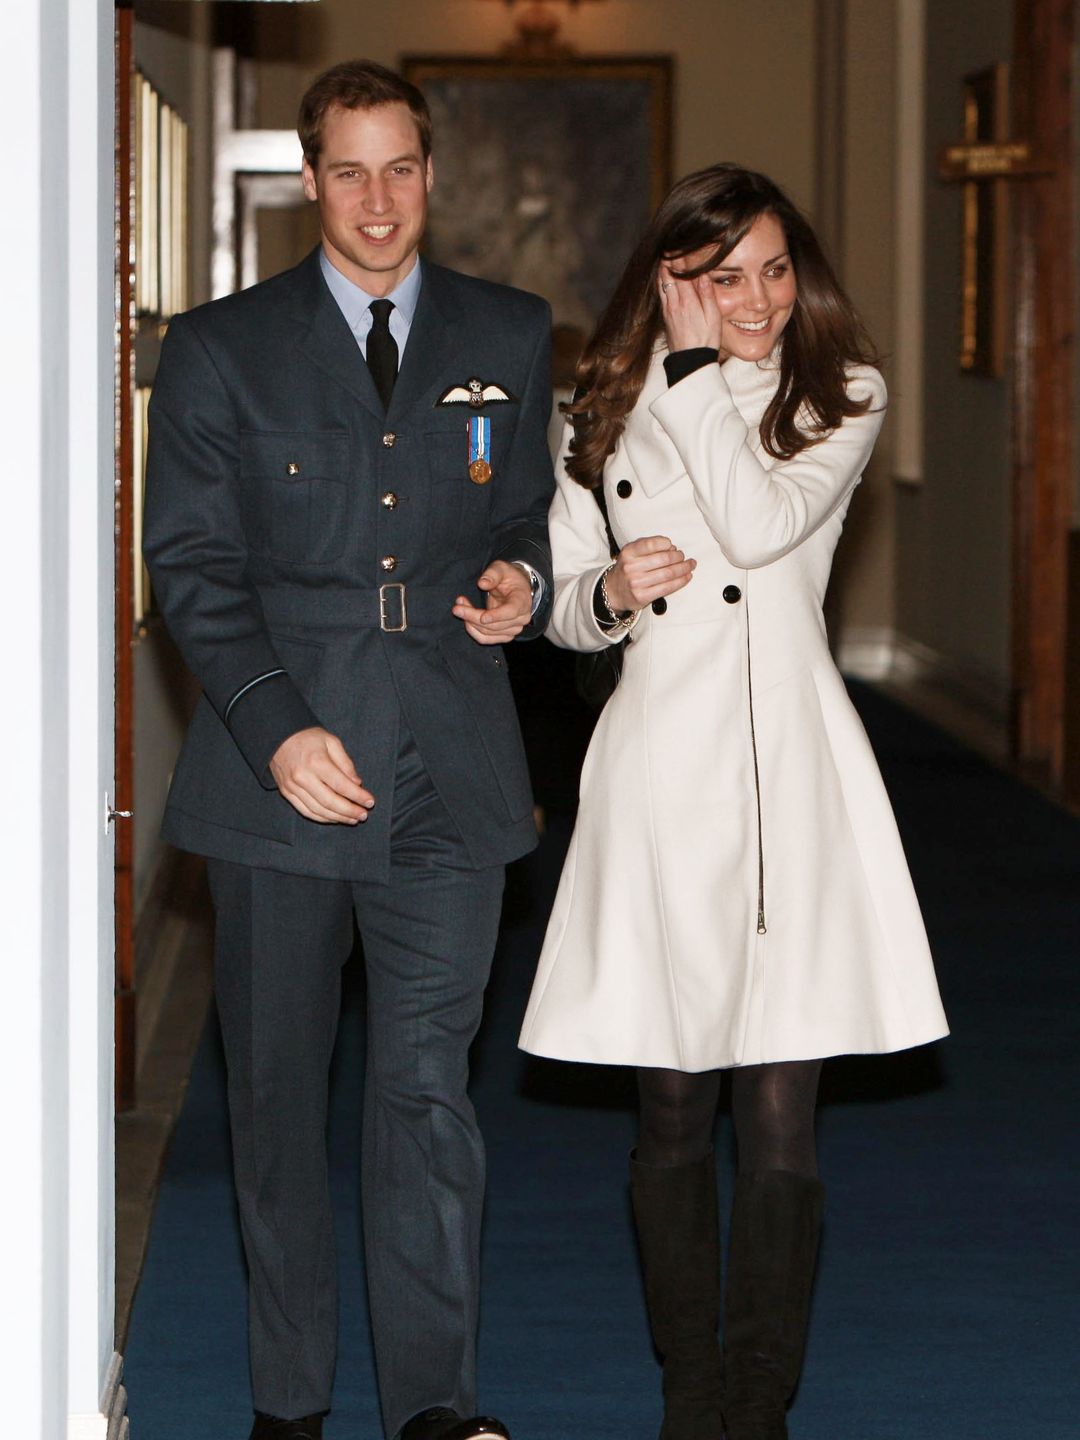 Kate Middleton accompanies Prince William as he receives his RAF wings in 2008